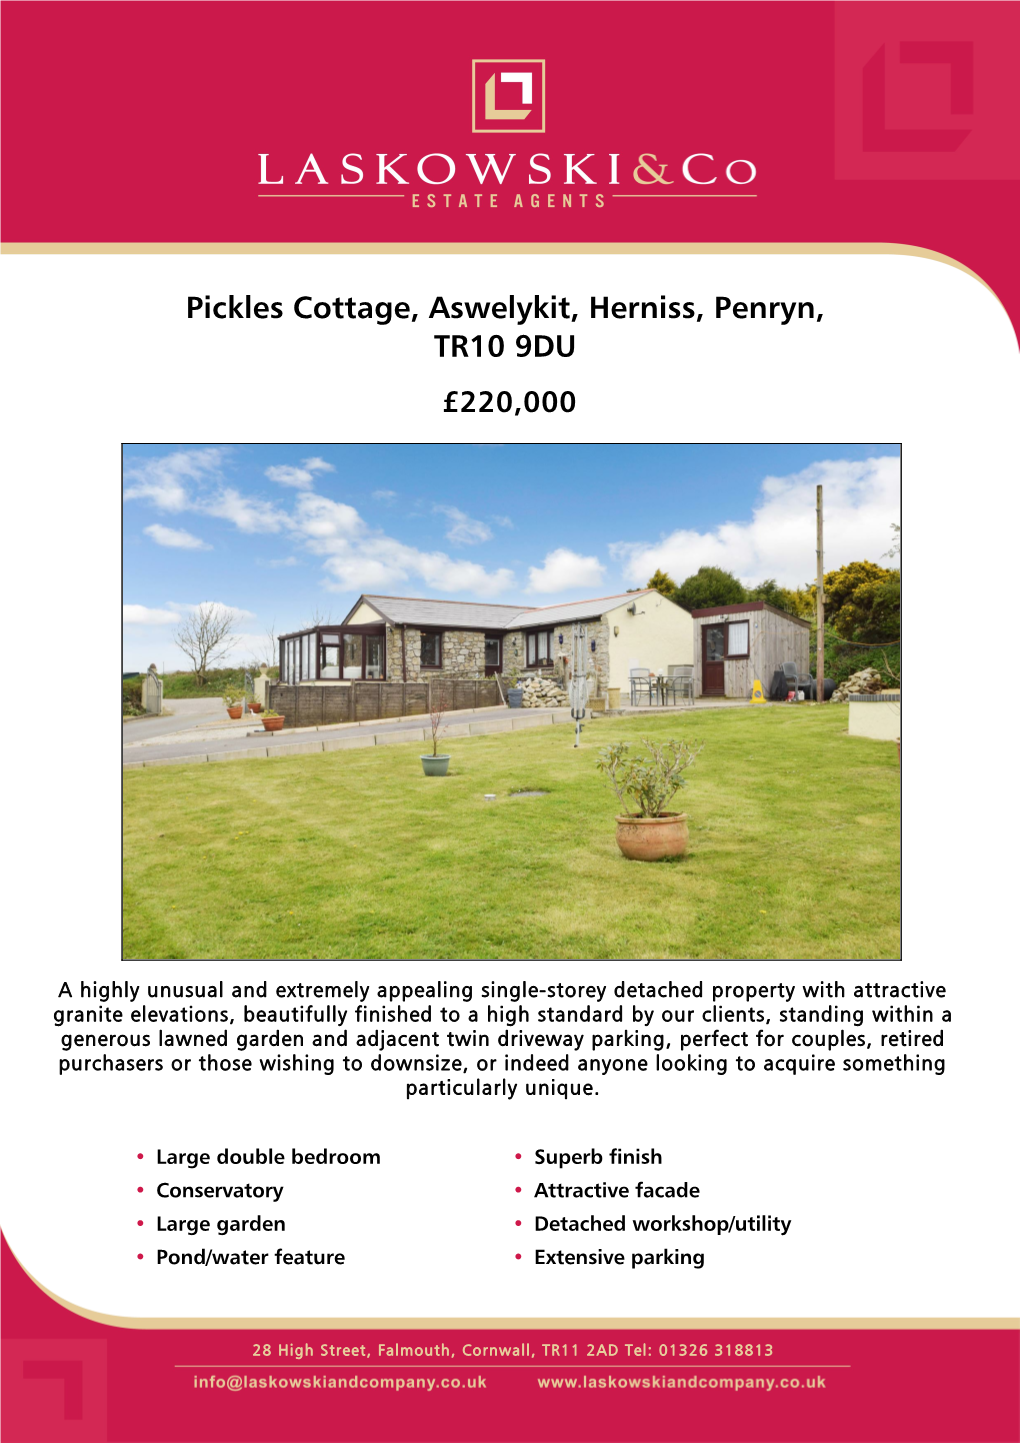 Pickles Cottage, Aswelykit, Herniss, Penryn, TR10 9DU £220,000